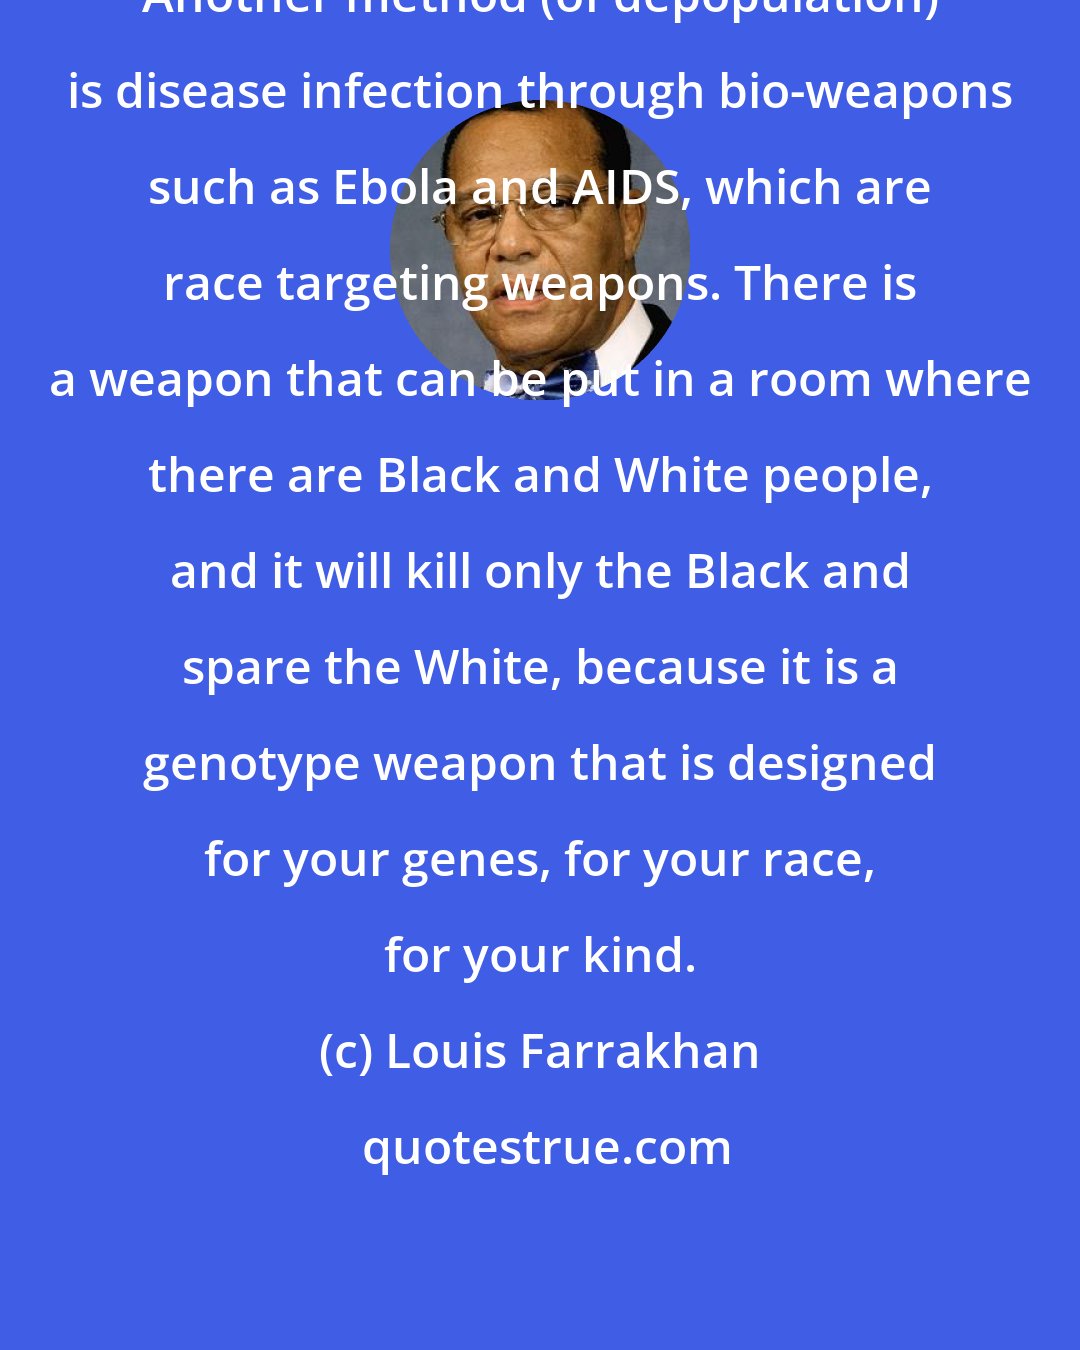 Louis Farrakhan: Another method (of depopulation) is disease infection through bio-weapons such as Ebola and AIDS, which are race targeting weapons. There is a weapon that can be put in a room where there are Black and White people, and it will kill only the Black and spare the White, because it is a genotype weapon that is designed for your genes, for your race, for your kind.